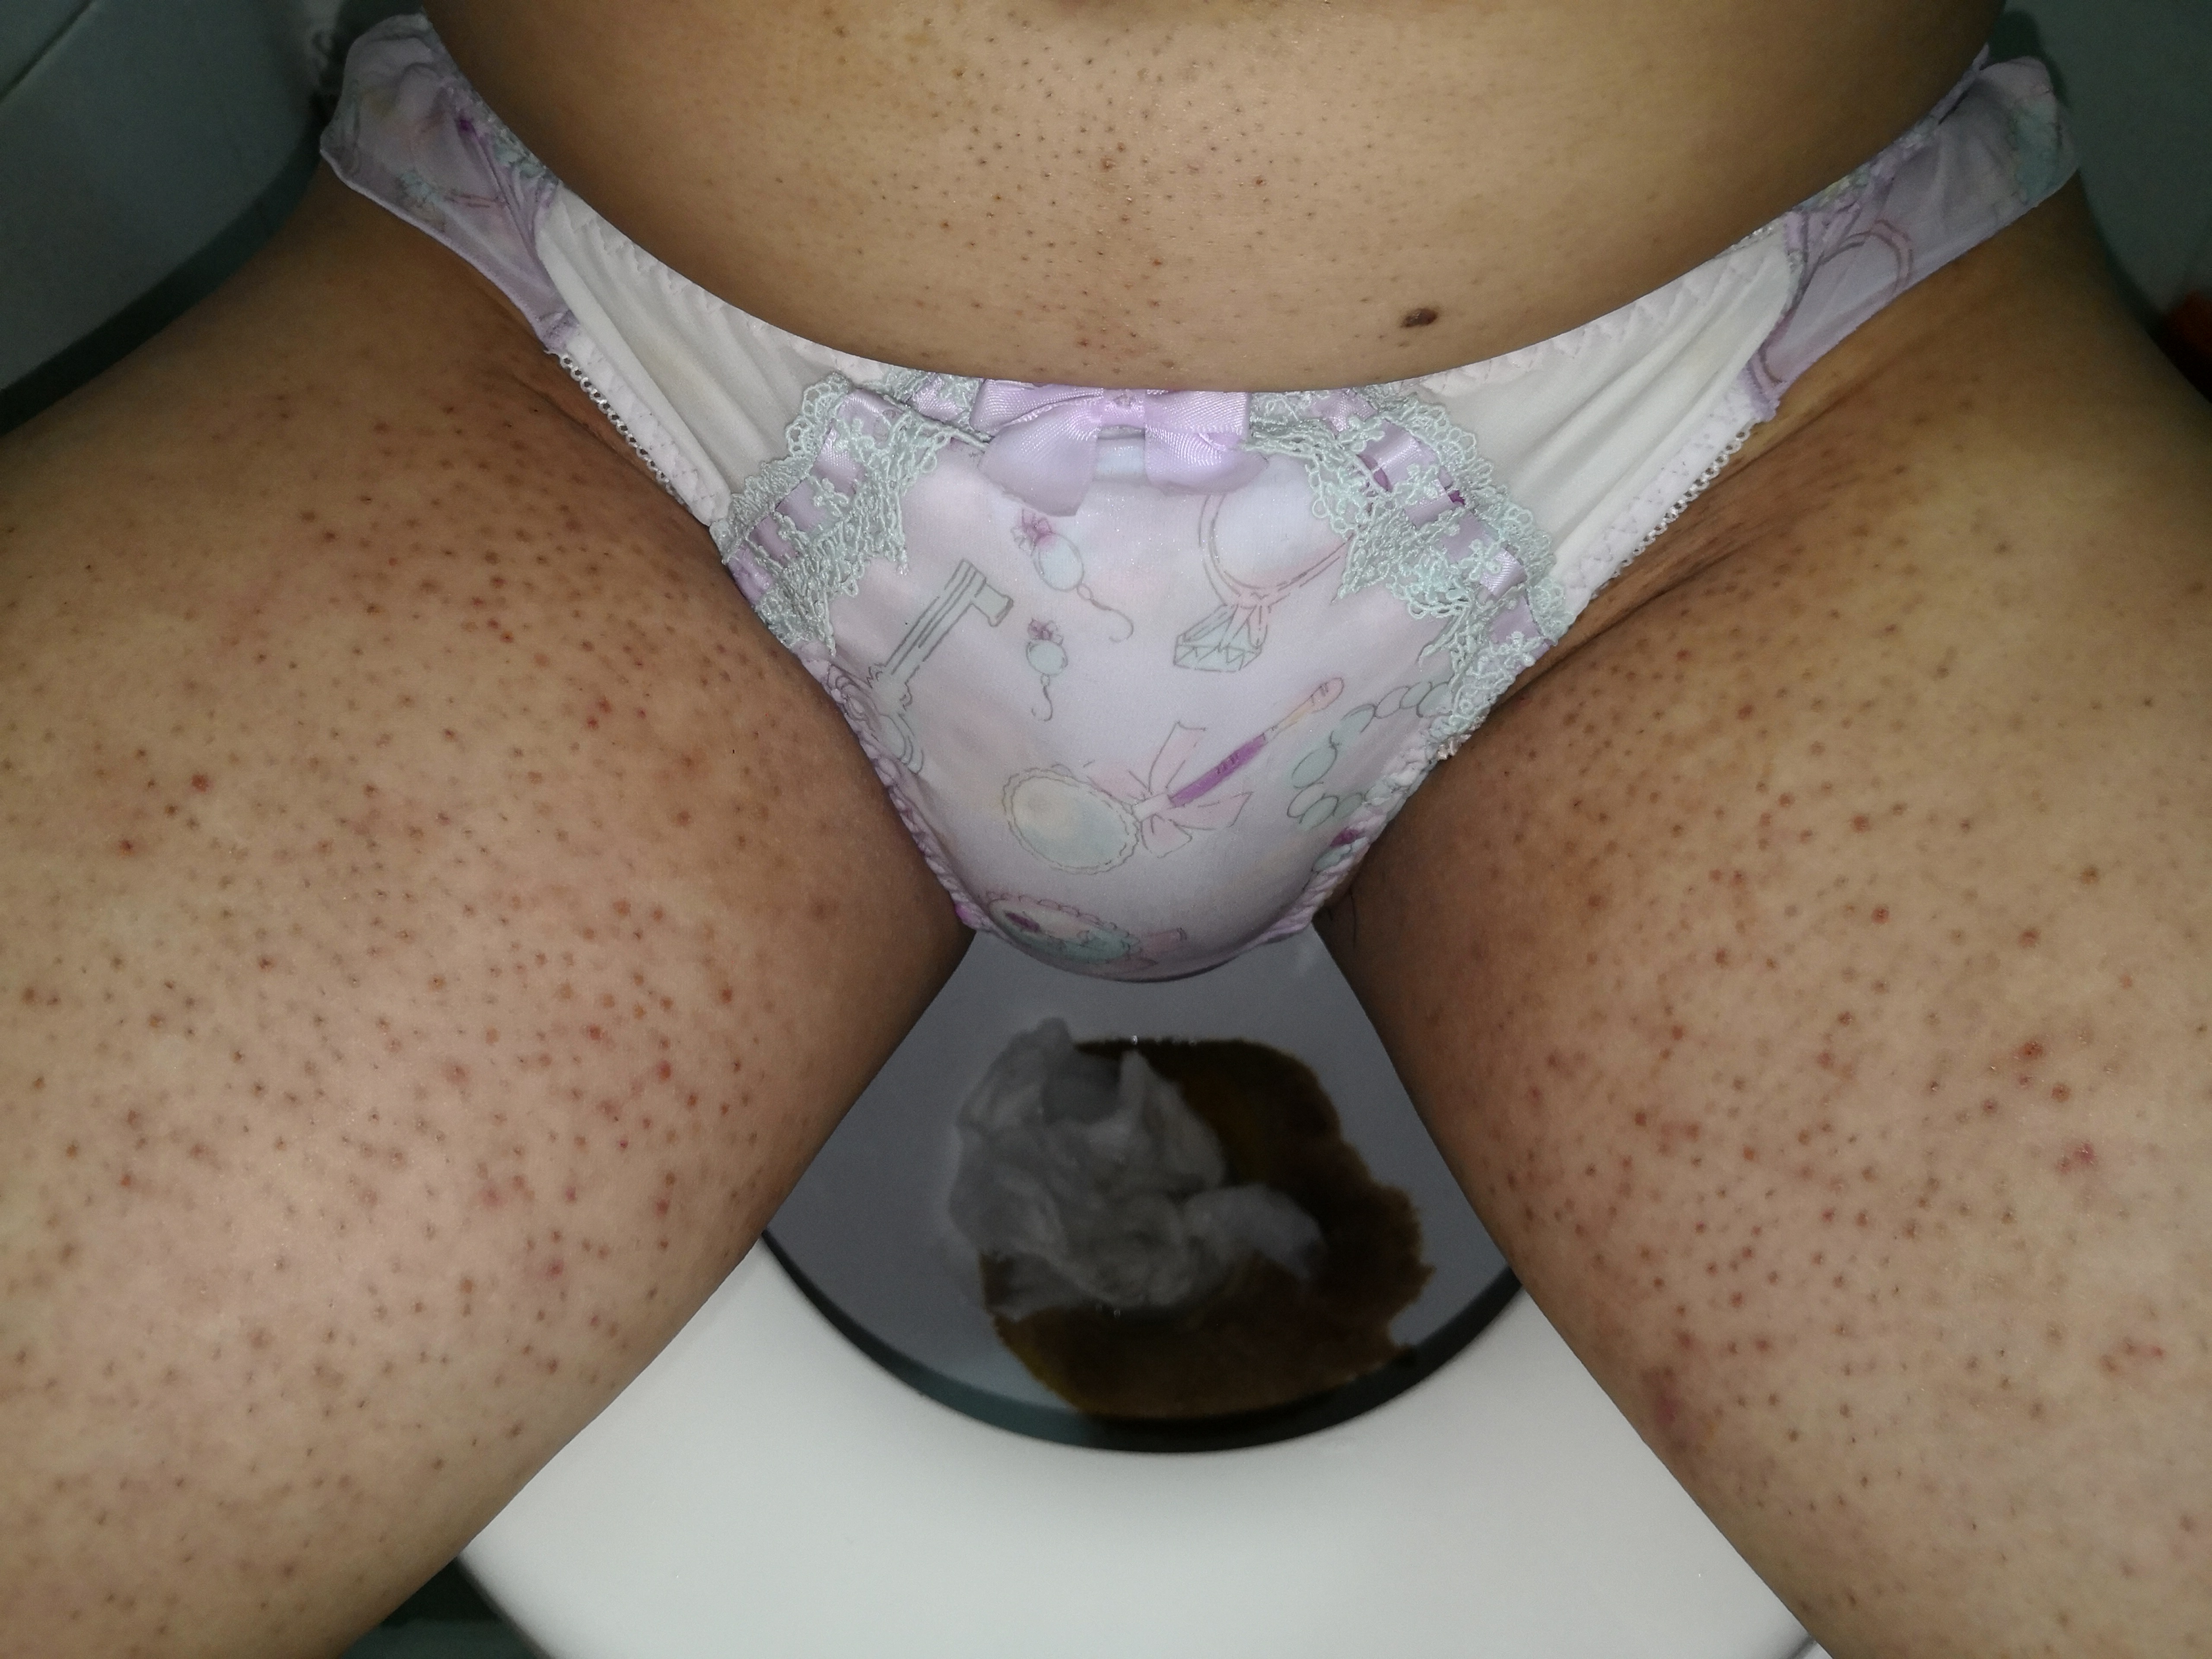 Two lovely ... style panties play together!!! pee and poop!! - 2